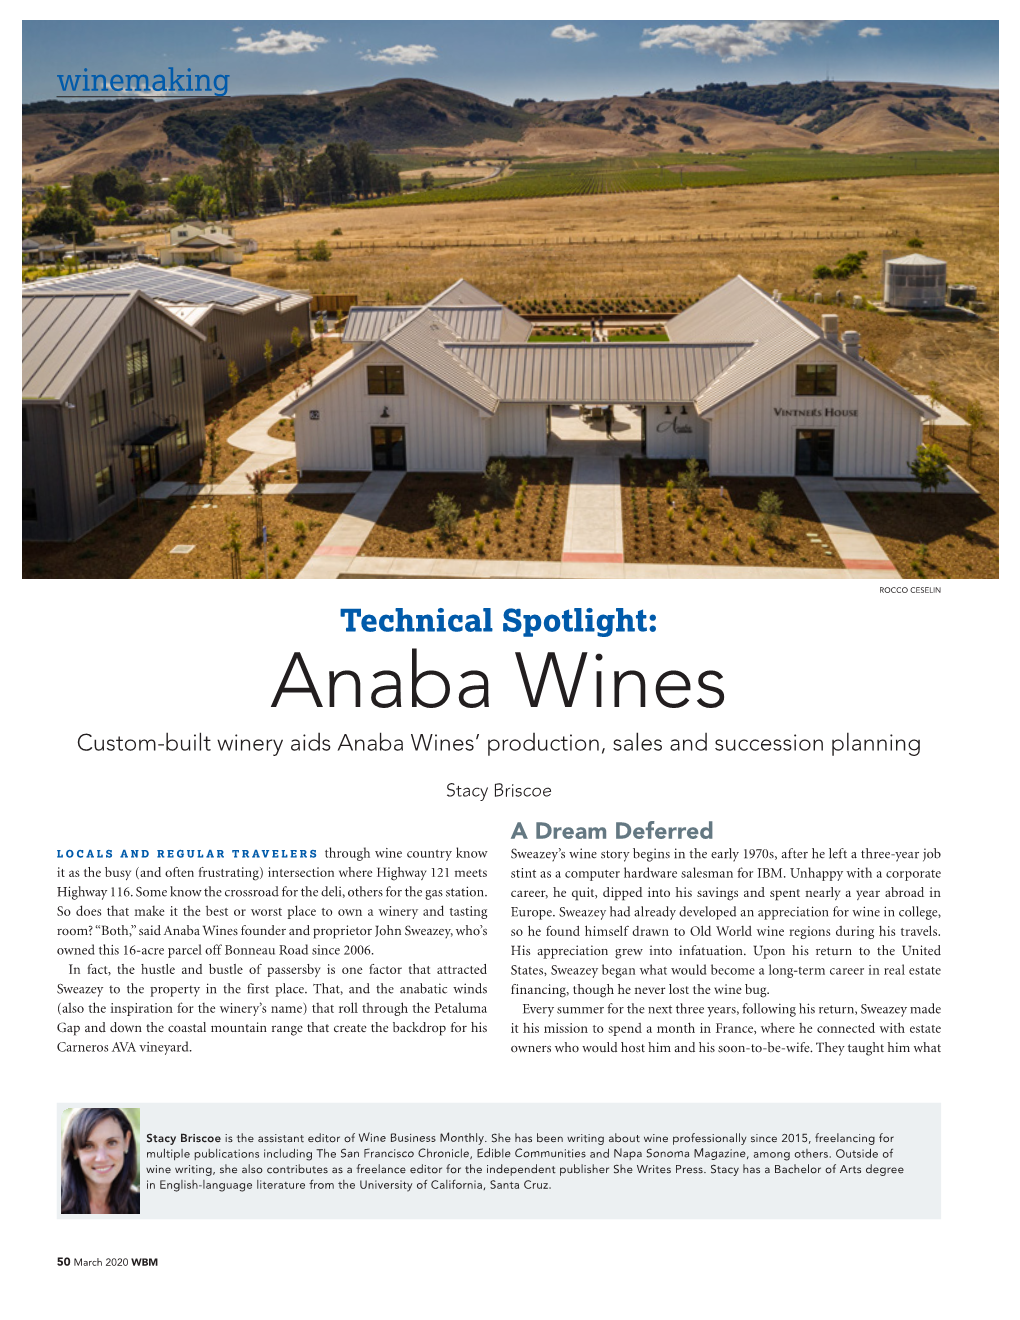 Anaba Wines Custom-Built Winery Aids Anaba Wines’ Production, Sales and Succession Planning